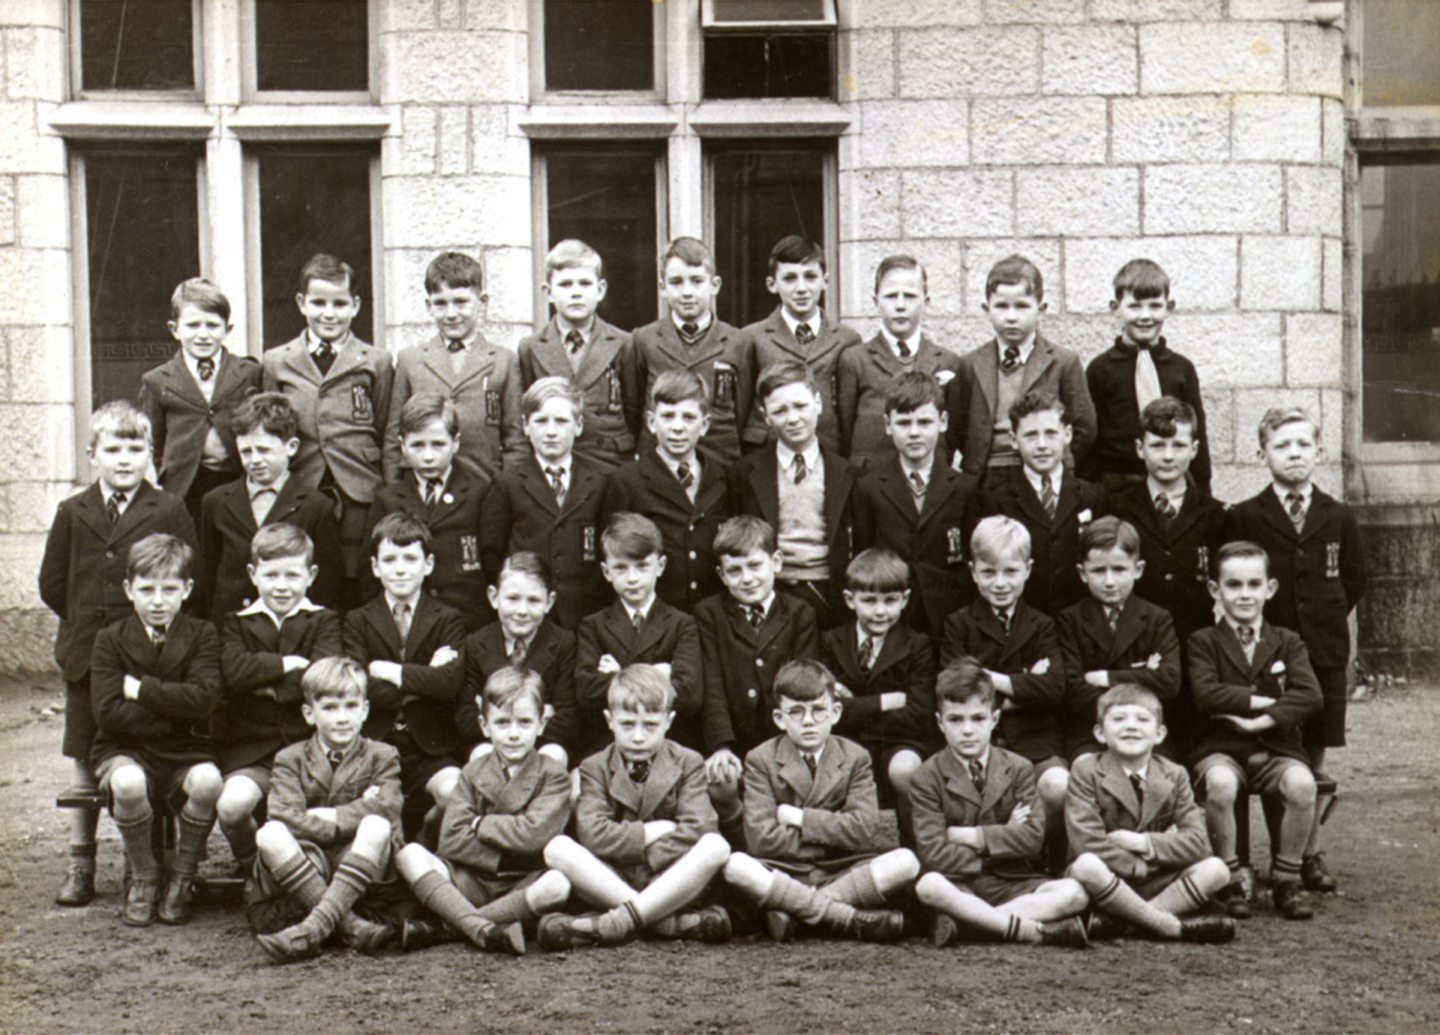 Young boys at Aberdeen Grammar School pose for a class photo in the 1940s.